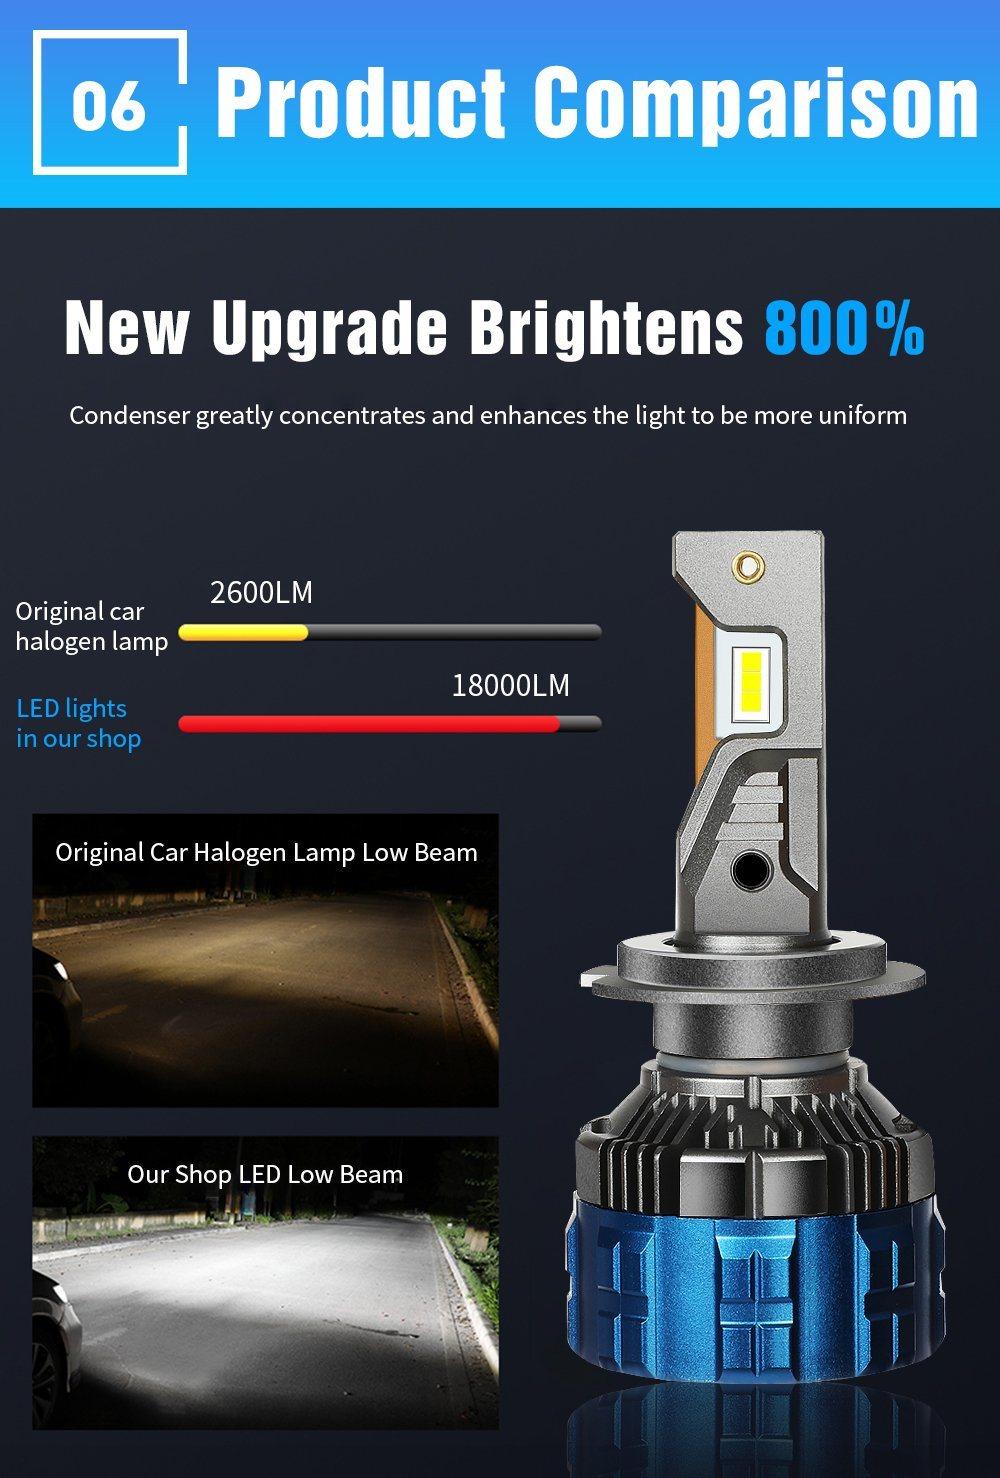 Super Bright Car LED Headlight Bulbs F8 Csp Chip 16000lm 110W 18000lm H7 H8 H9 H11 9005 9006 Can Be Used on Trucks